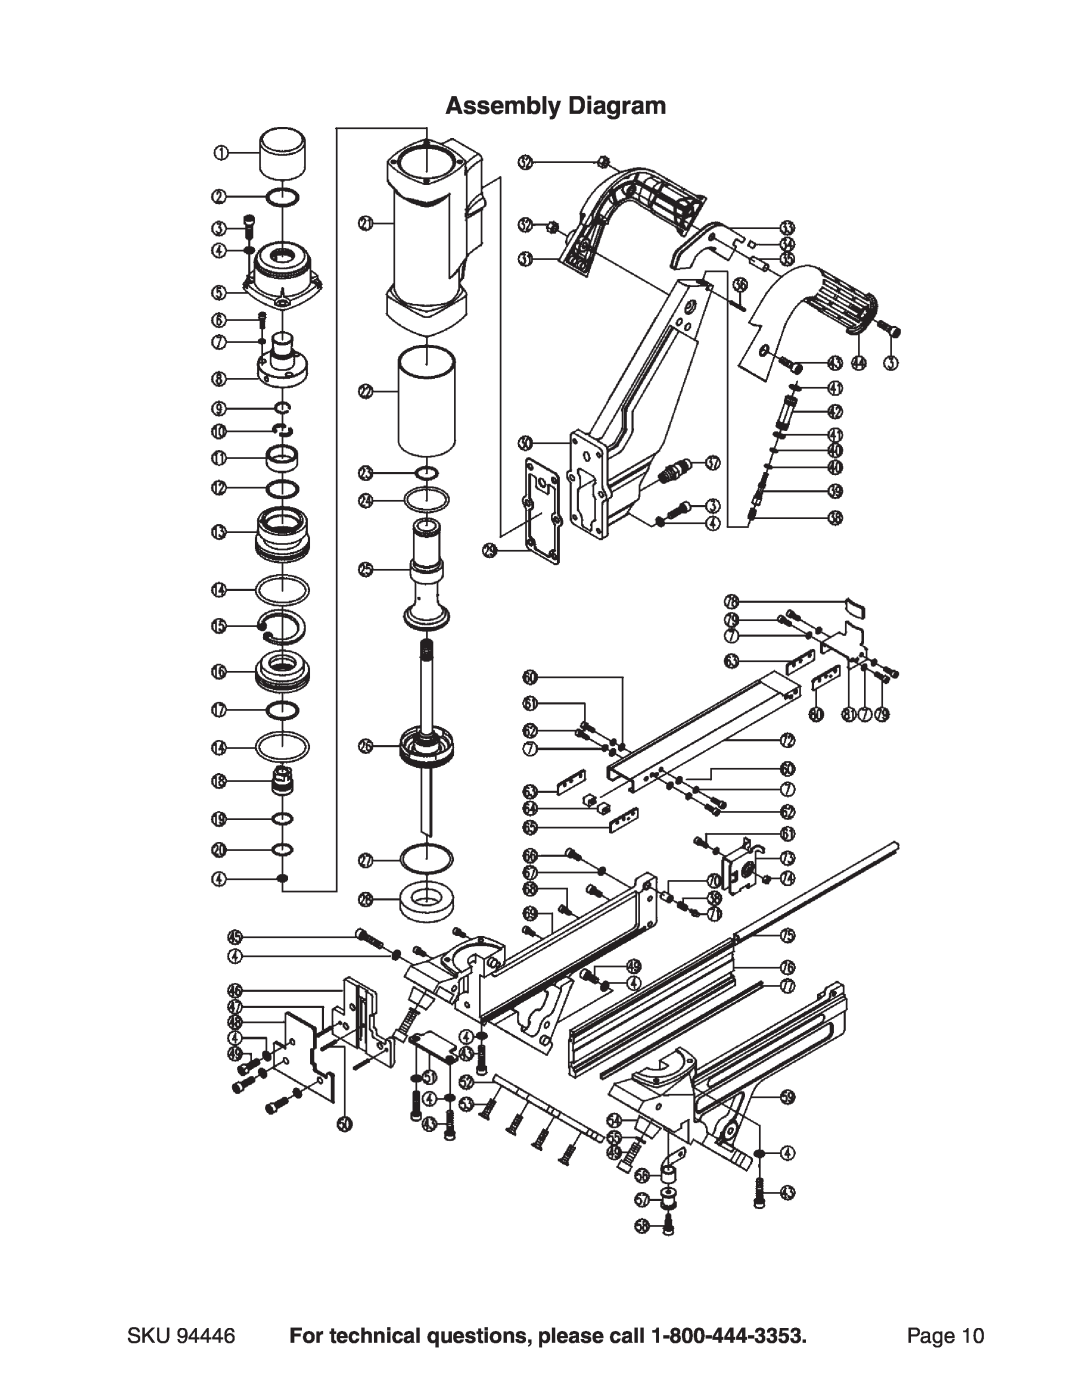 Harbor Freight Tools 94446 operating instructions Assembly Diagram, For technical questions, please call, Page 